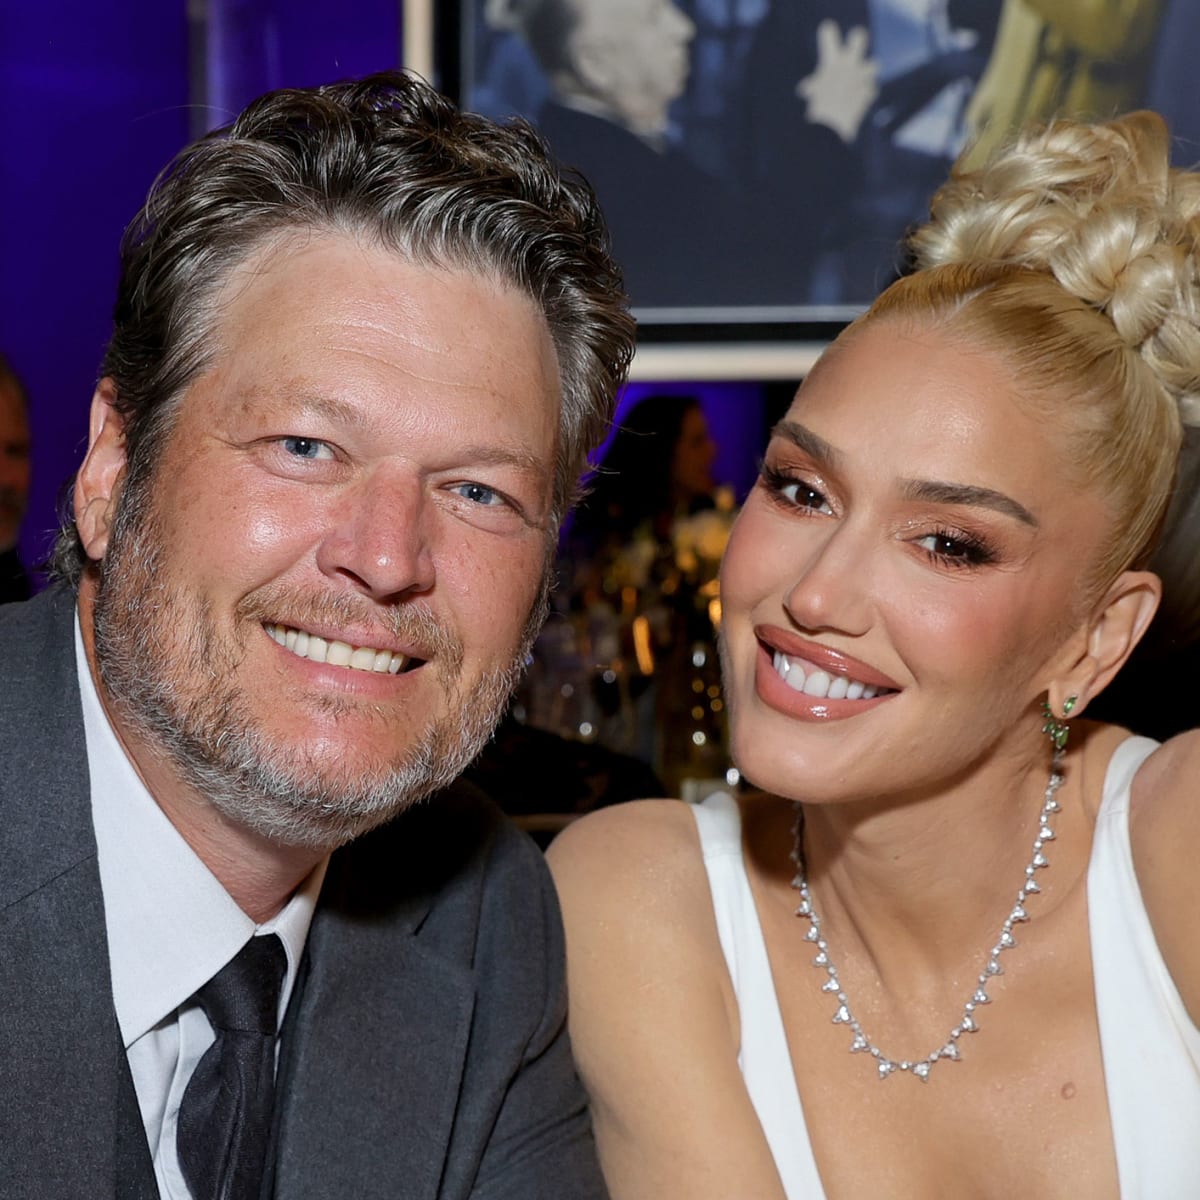 Blake Shelton Affirms Love for Wife on Anniversary after Putting Her 3